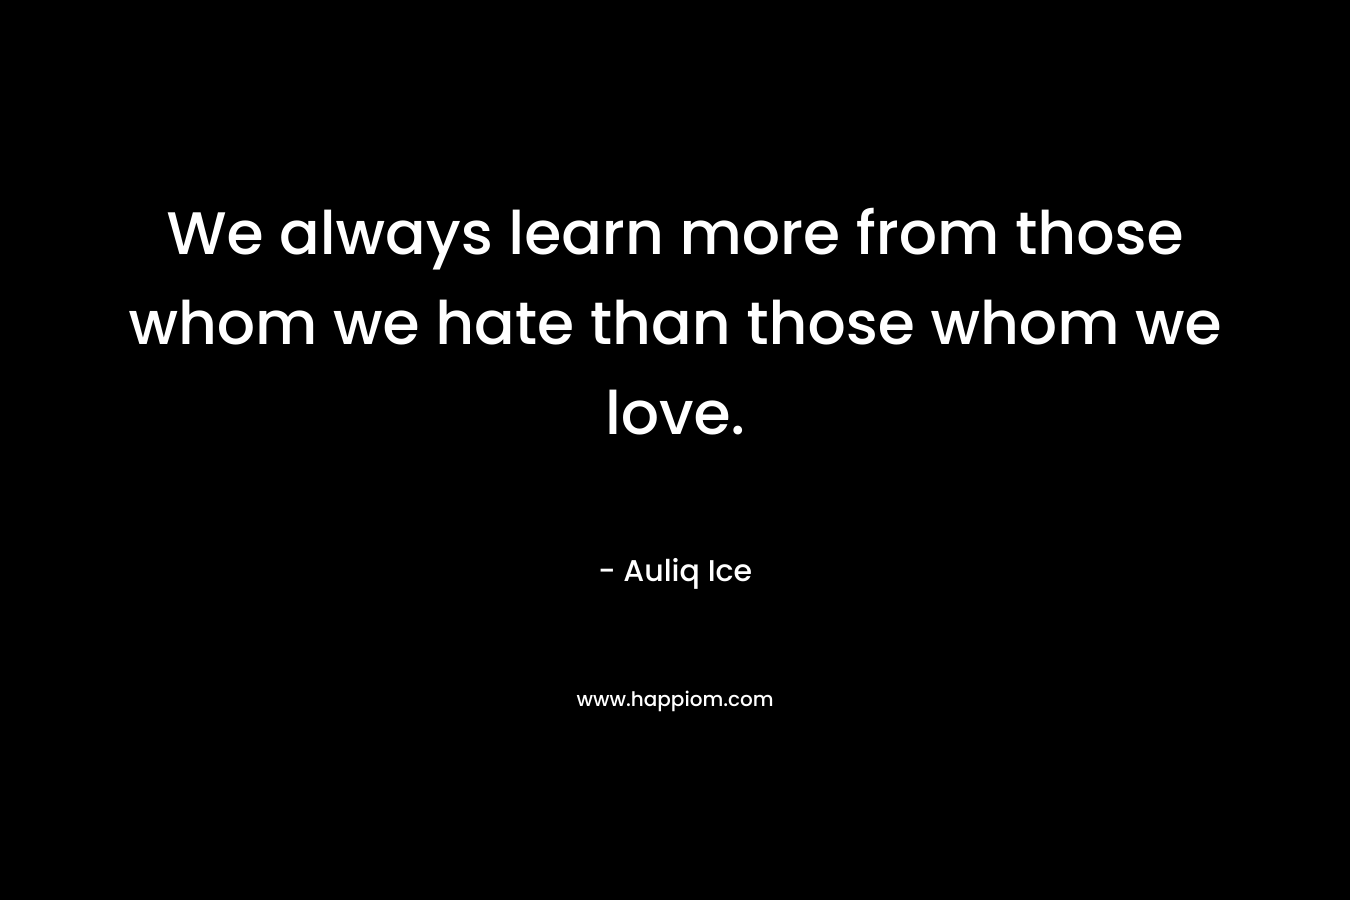 We always learn more from those whom we hate than those whom we love.